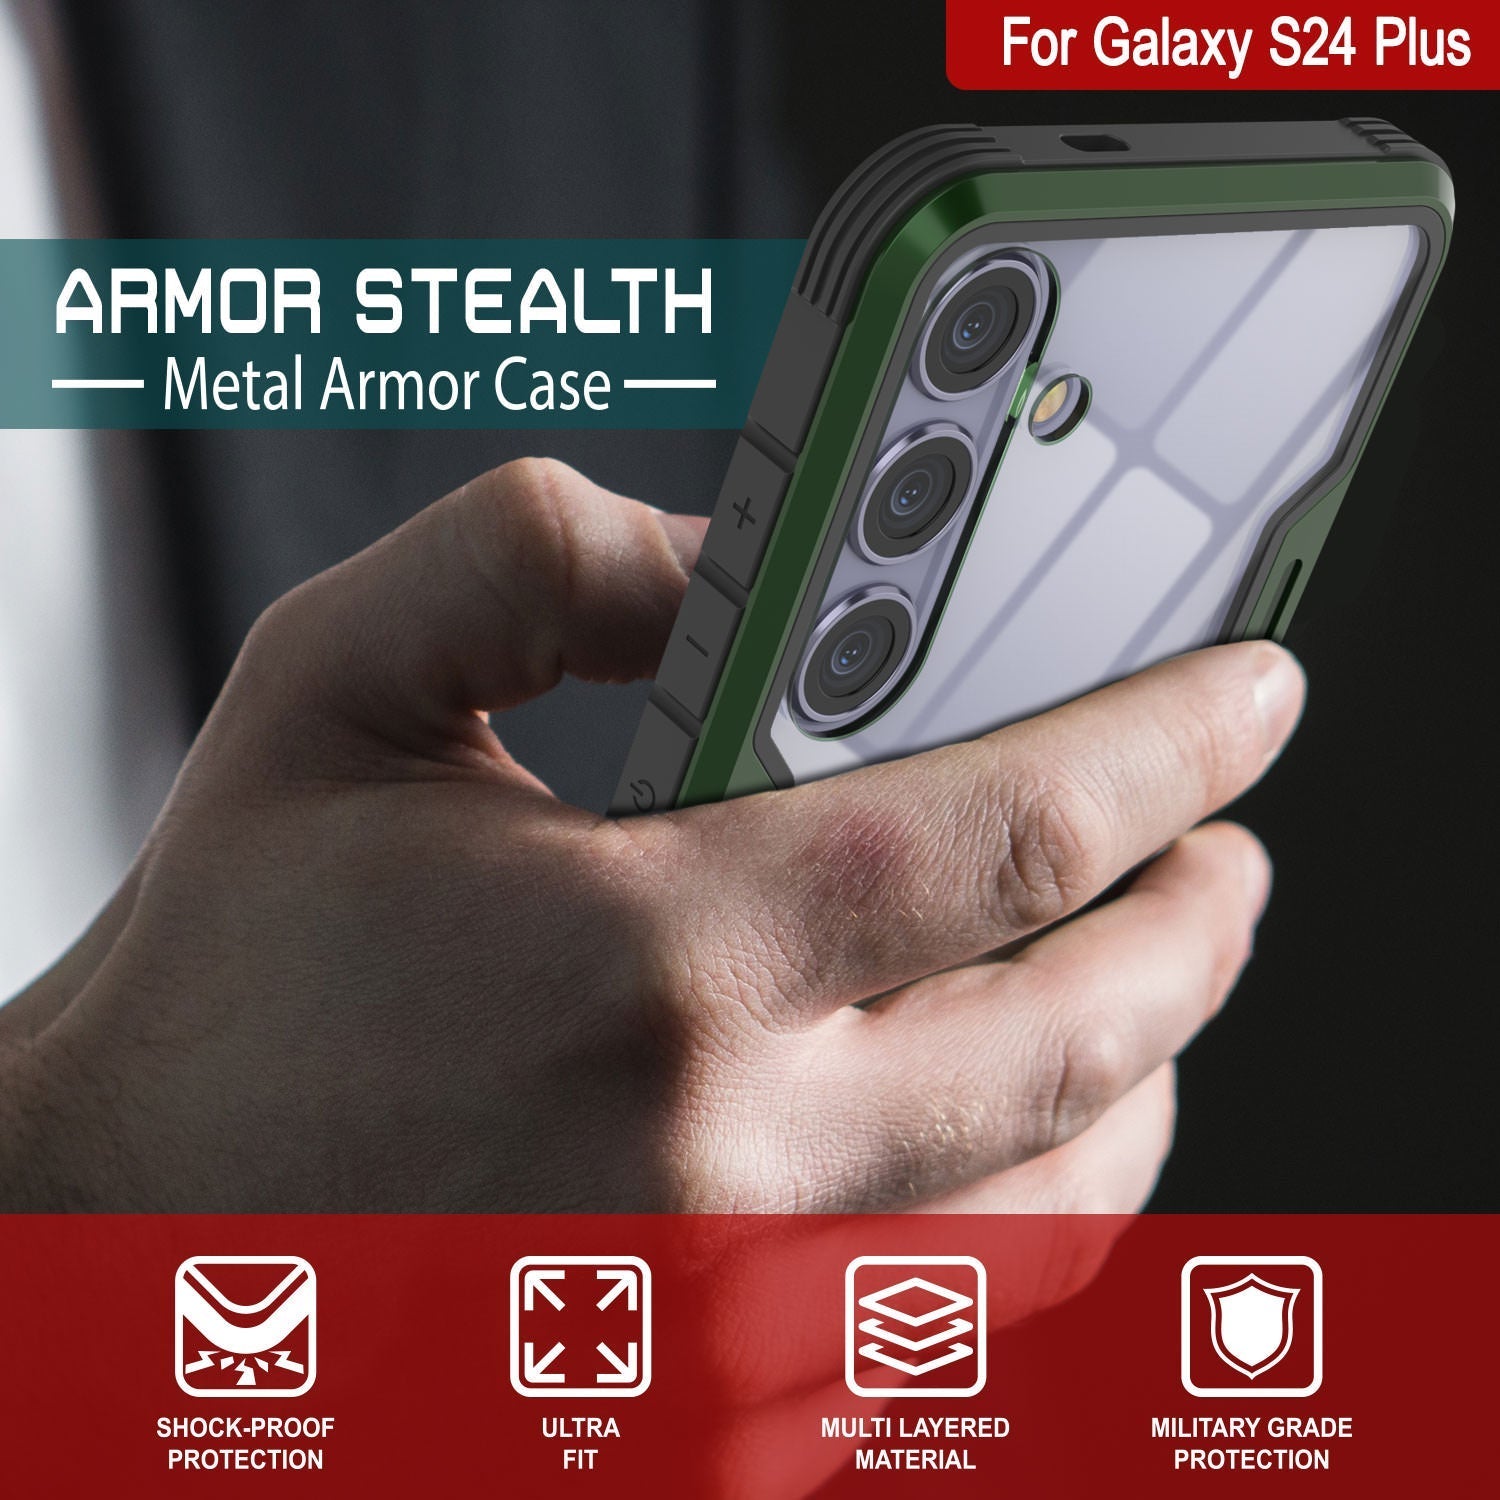 Punkcase S24+ Plus Armor Stealth Case Protective Military Grade Multilayer Cover [Dark Green]